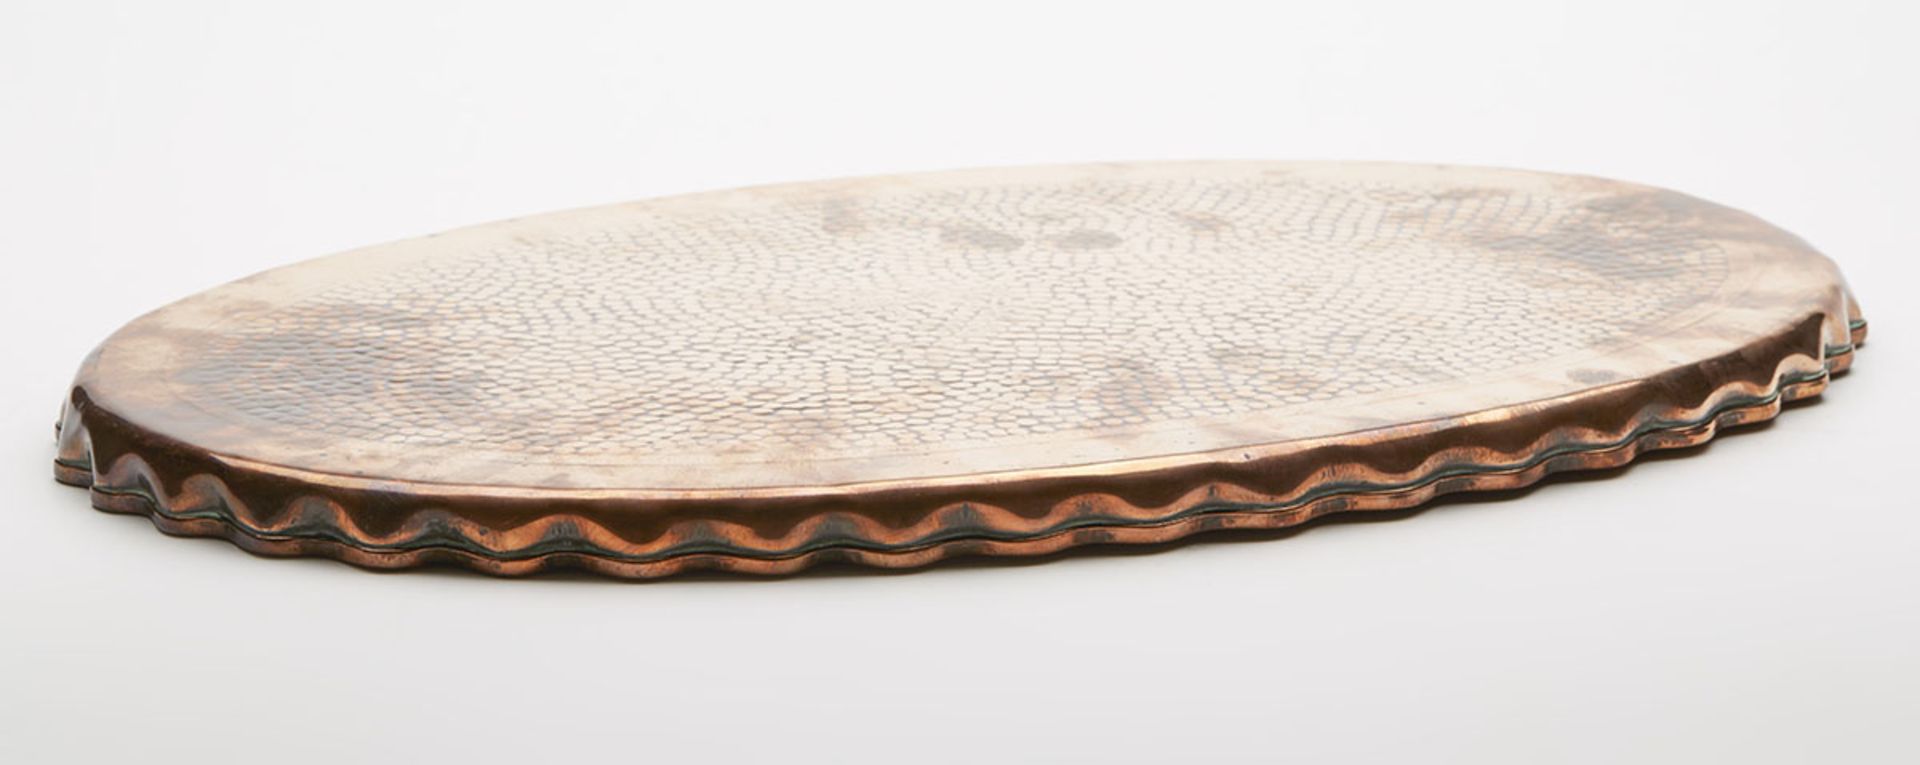 ARTS & CRAFTS QUALITY OVAL COPPER TRAY MARKED PICARDS c1910   DIMENSIONS   Length 46,25cm, Width - Image 5 of 8